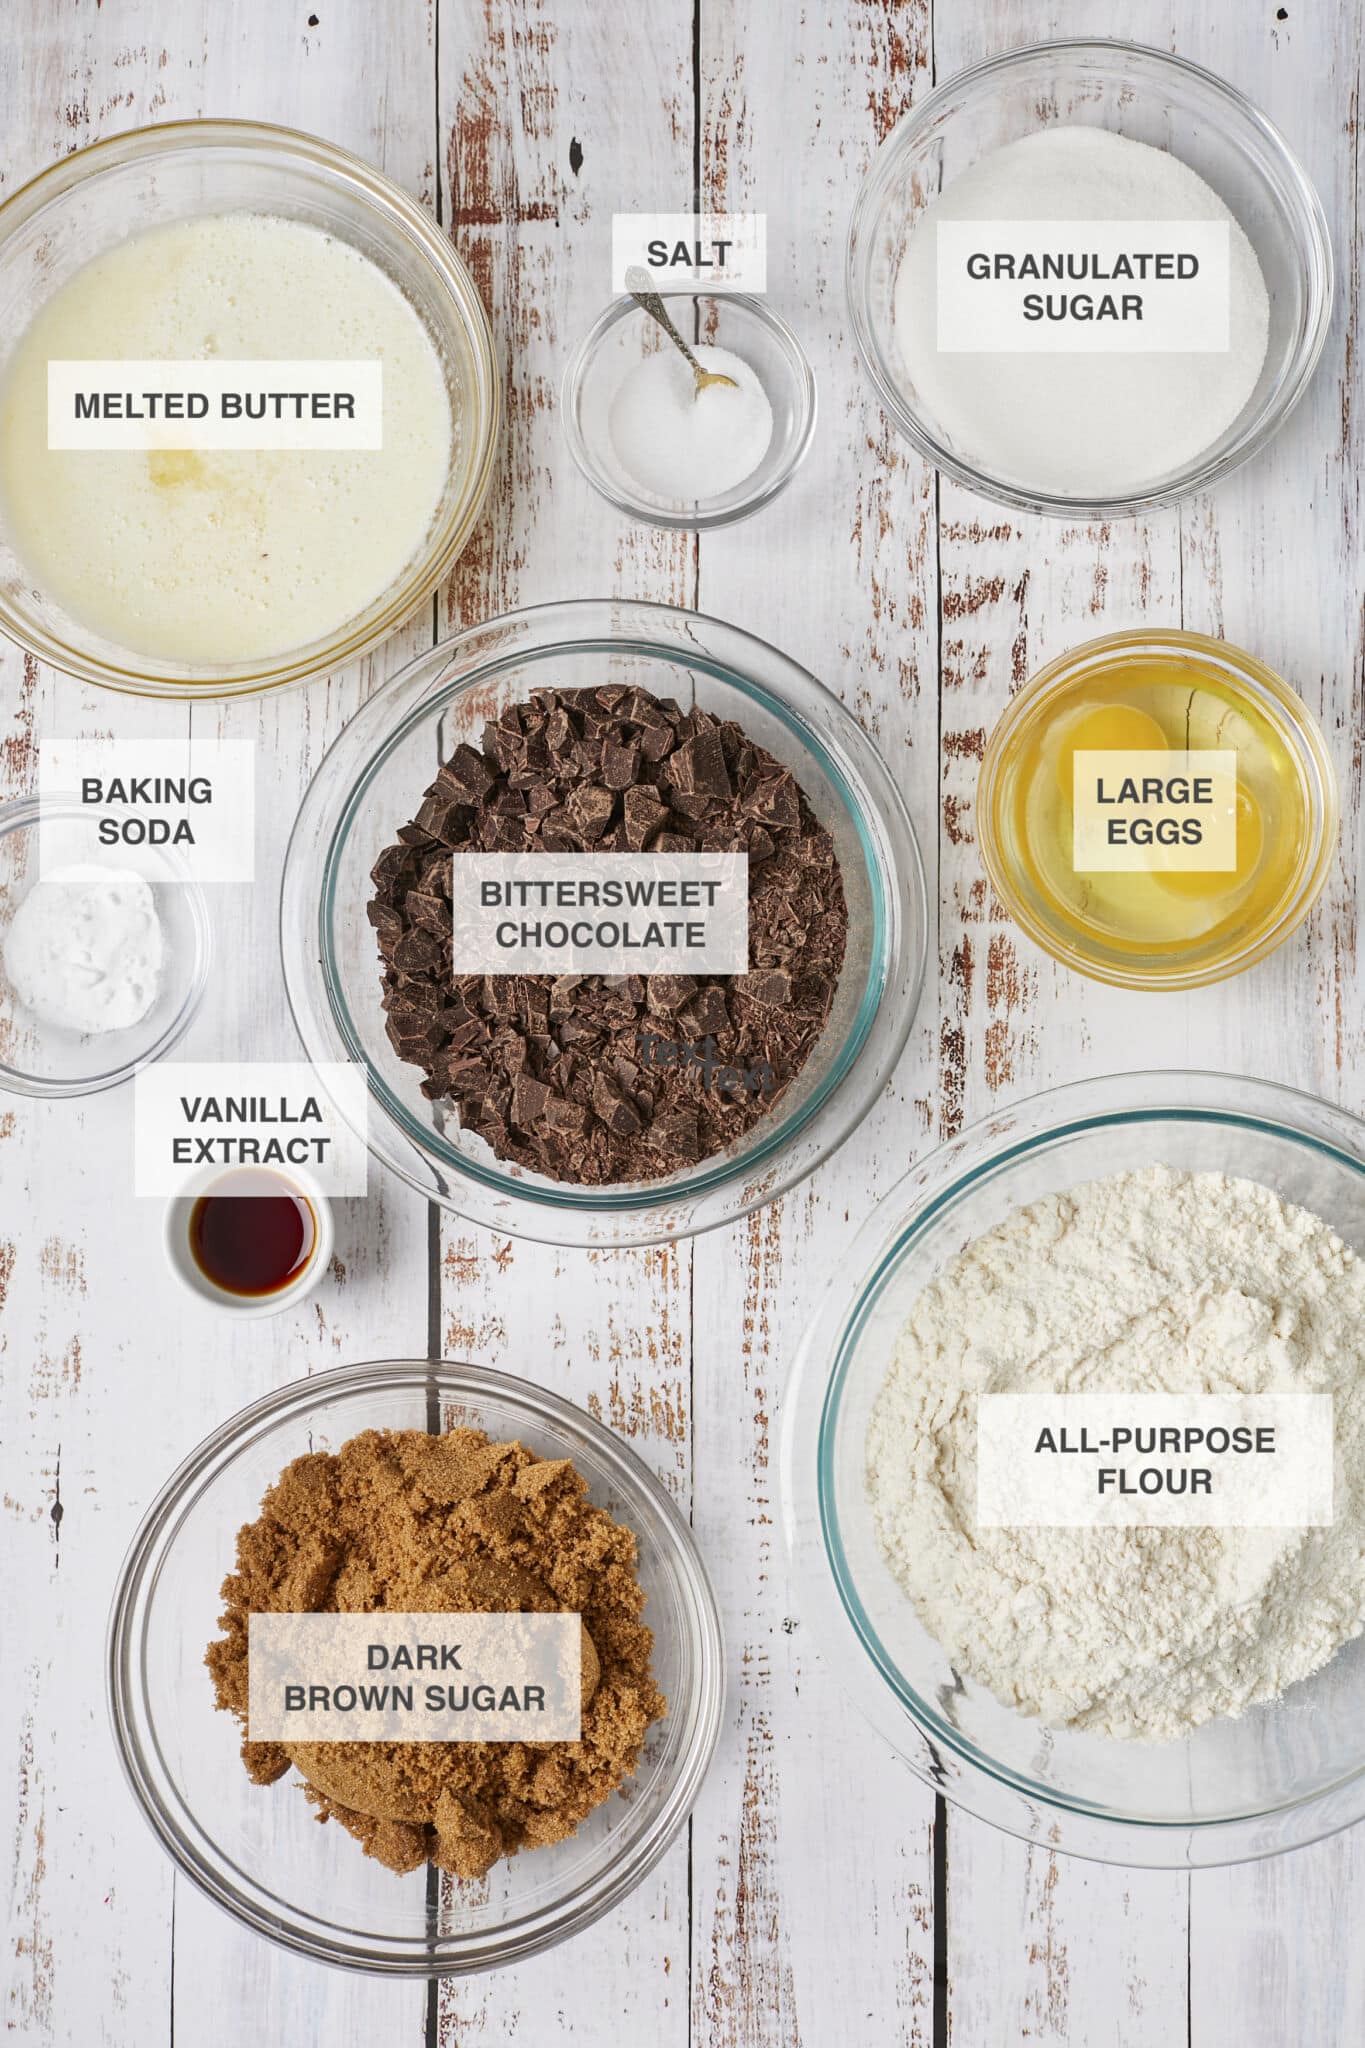 Ingredients for the Best Ever Chocolate Chip Cookies Recipe